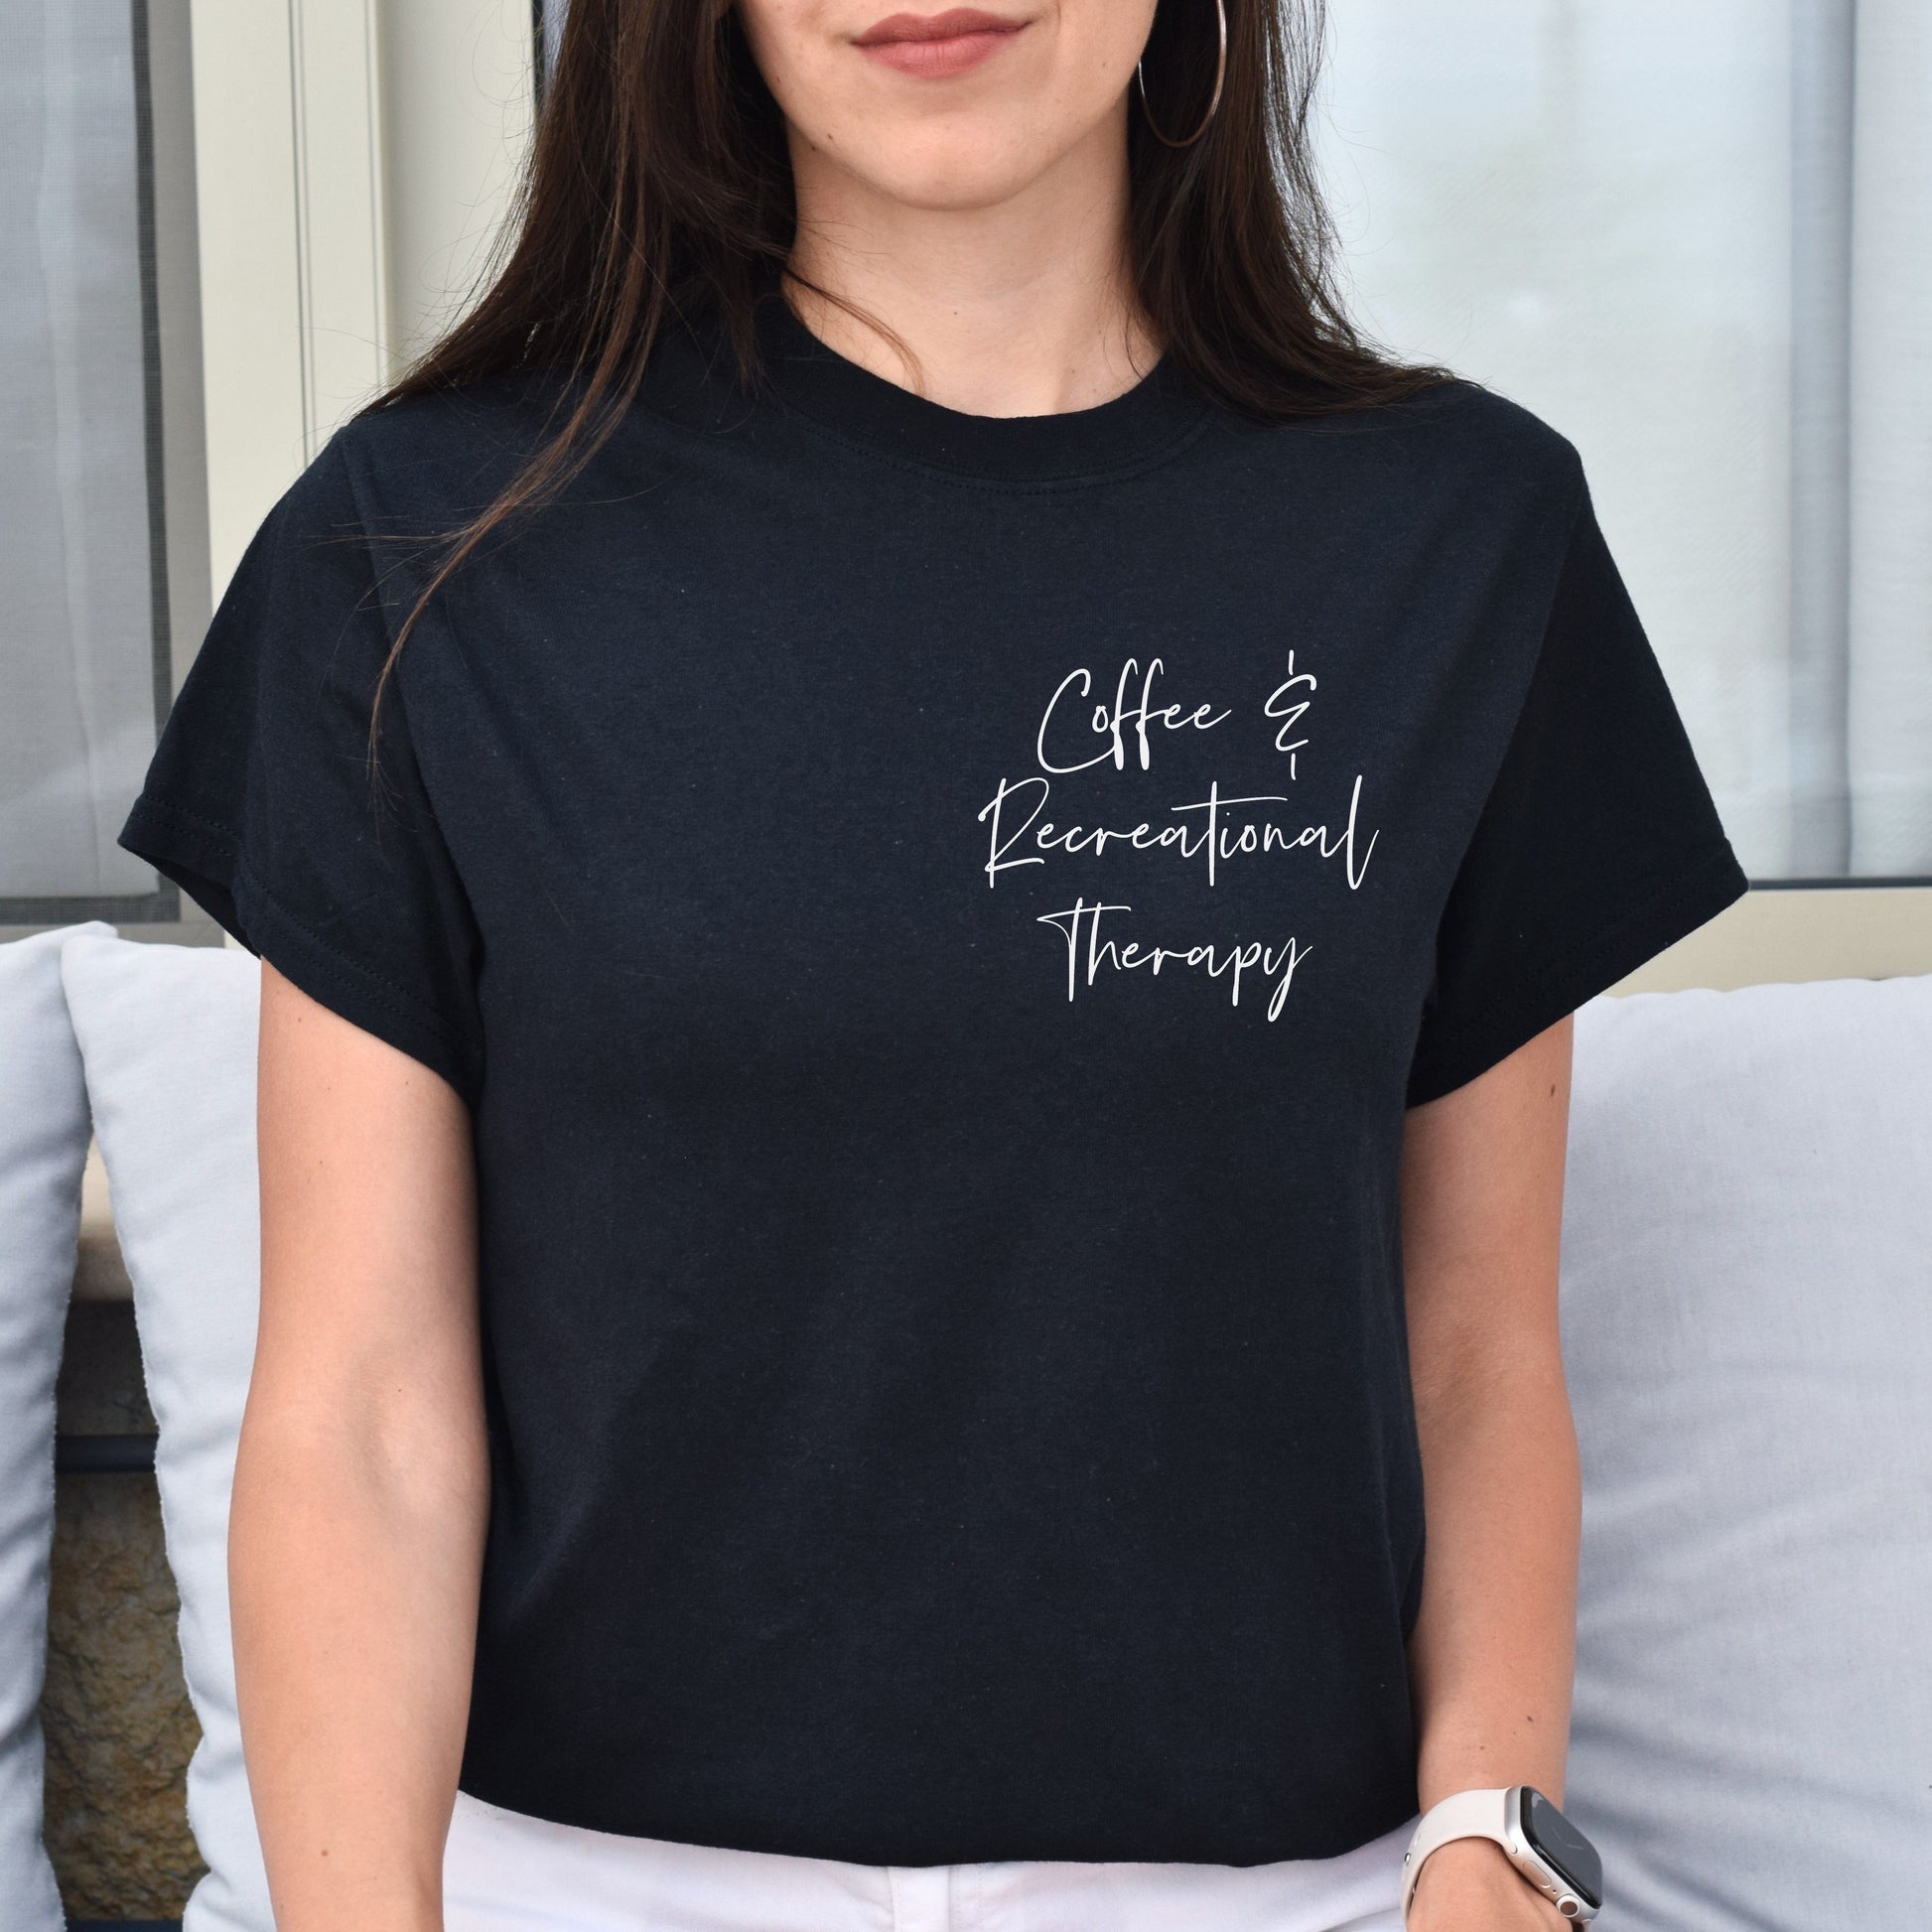 Coffee and recreational therapy pocket Unisex T-shirt RT tee Black Navy Dark Heather-Black-Family-Gift-Planet